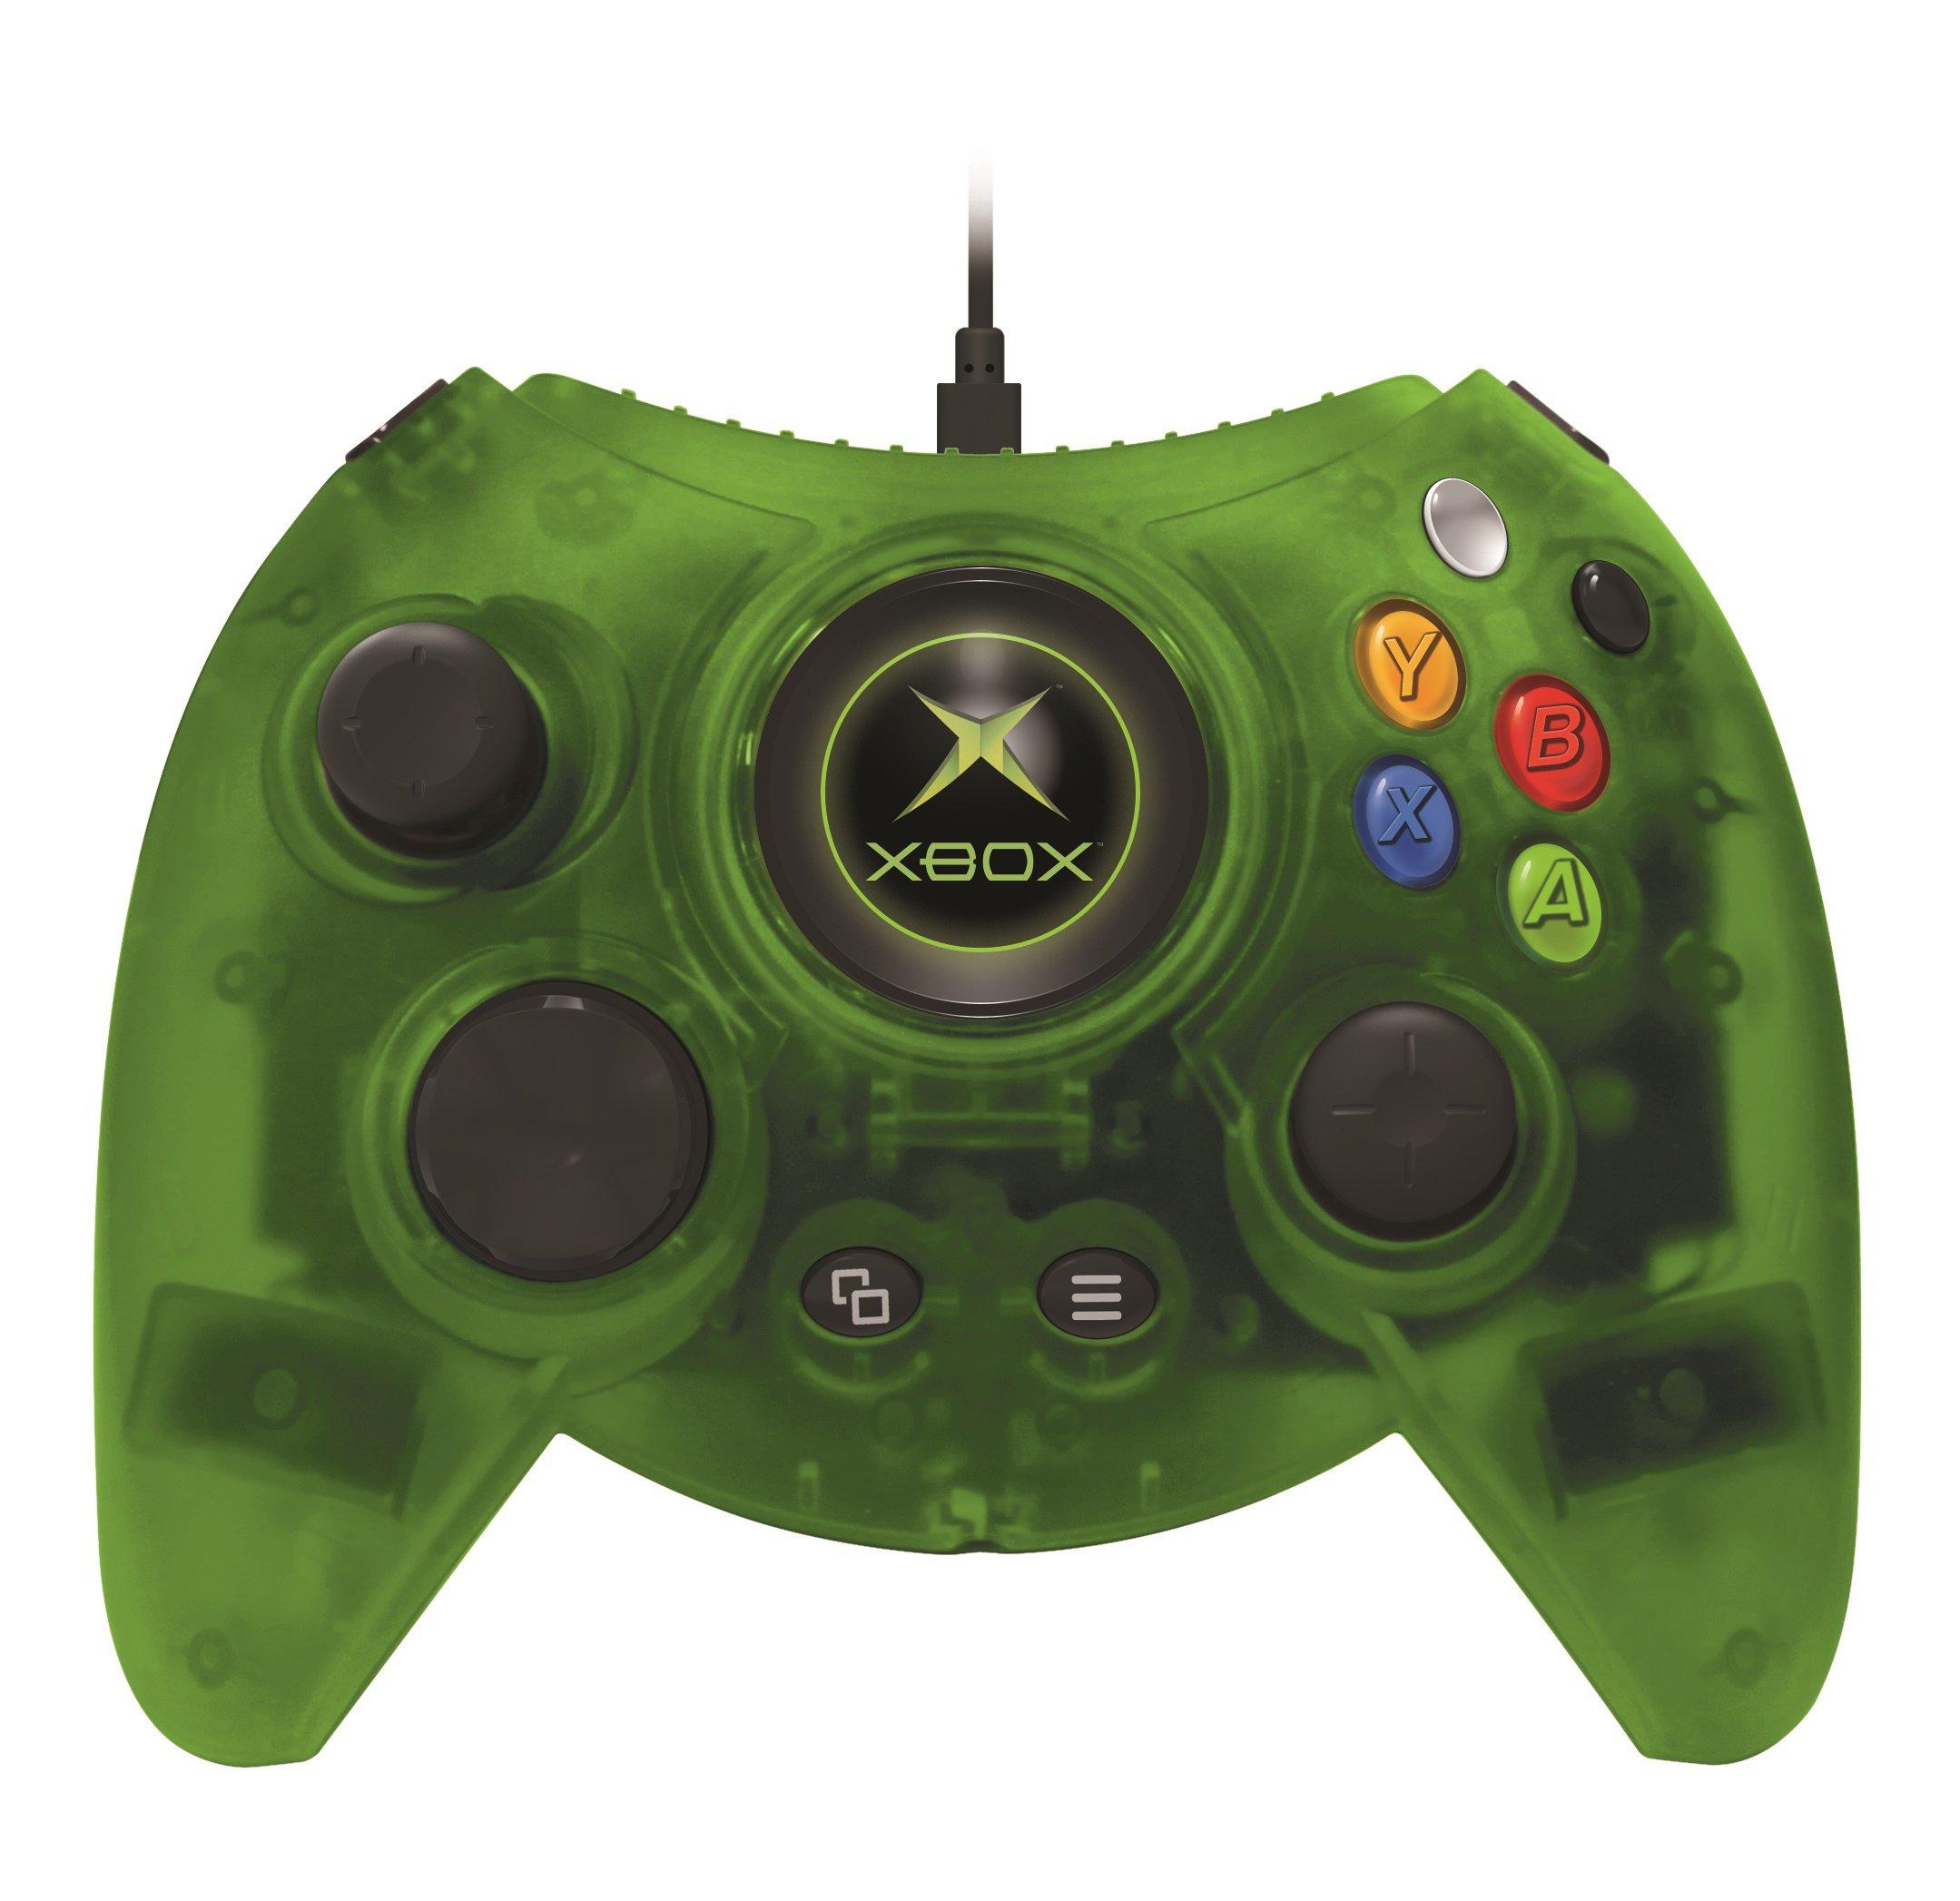 How much is a used xbox 360 controller at gamestop Duke Black Wired Controller For Xbox One Only At Gamestop Xbox One Gamestop